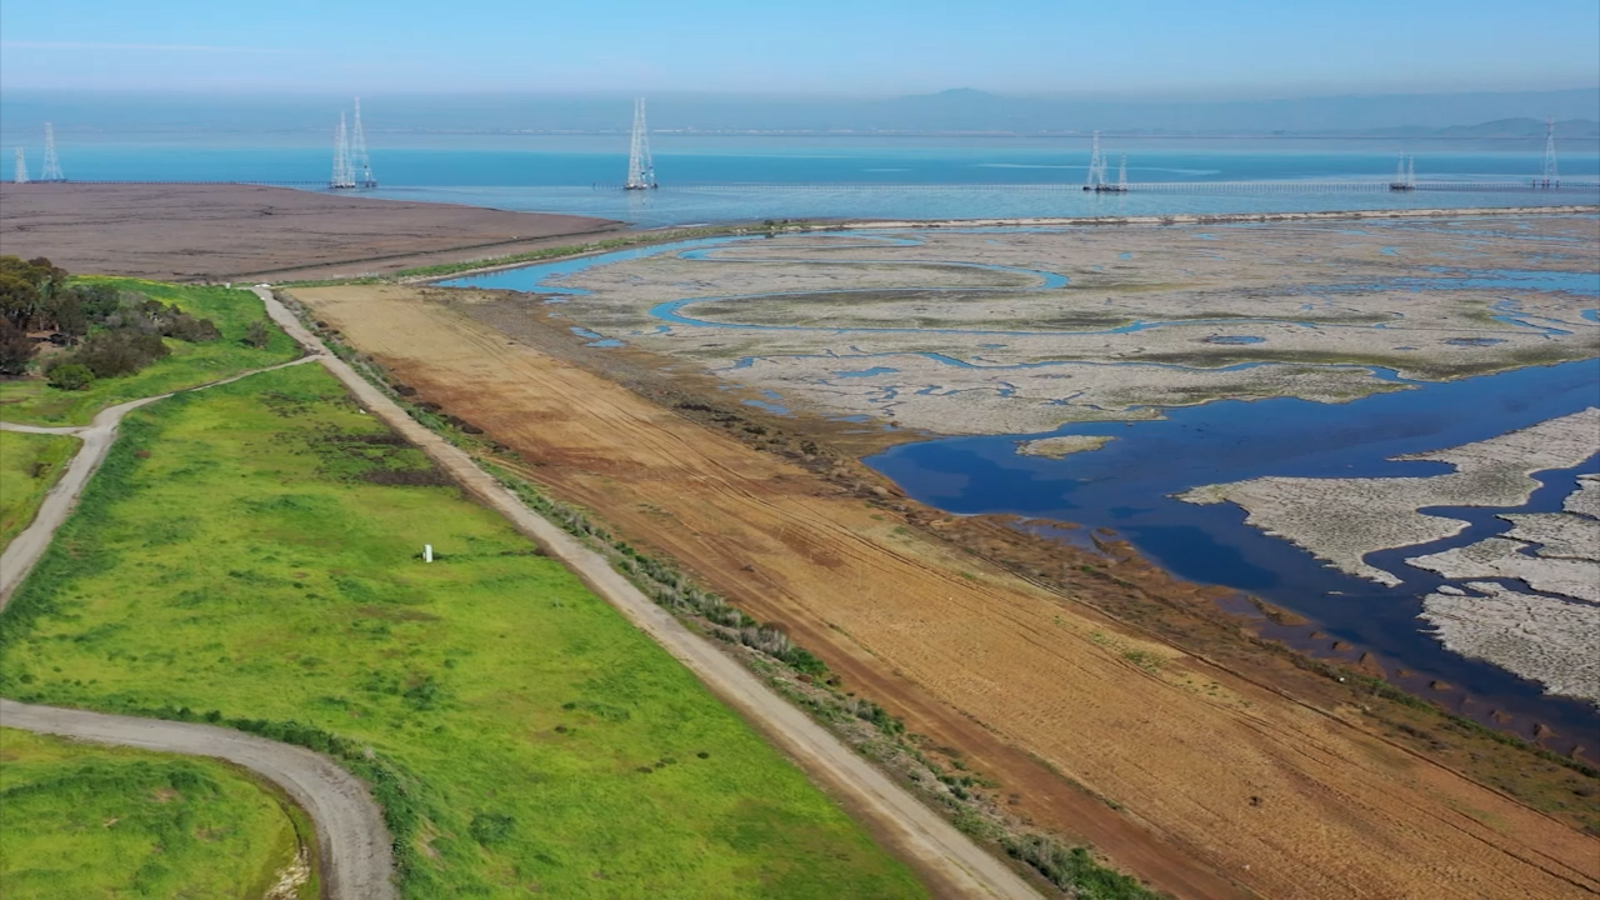 Here’s how horizontal levees protect shoreline projects like tidal marshes in San Francisco Bay [Video]